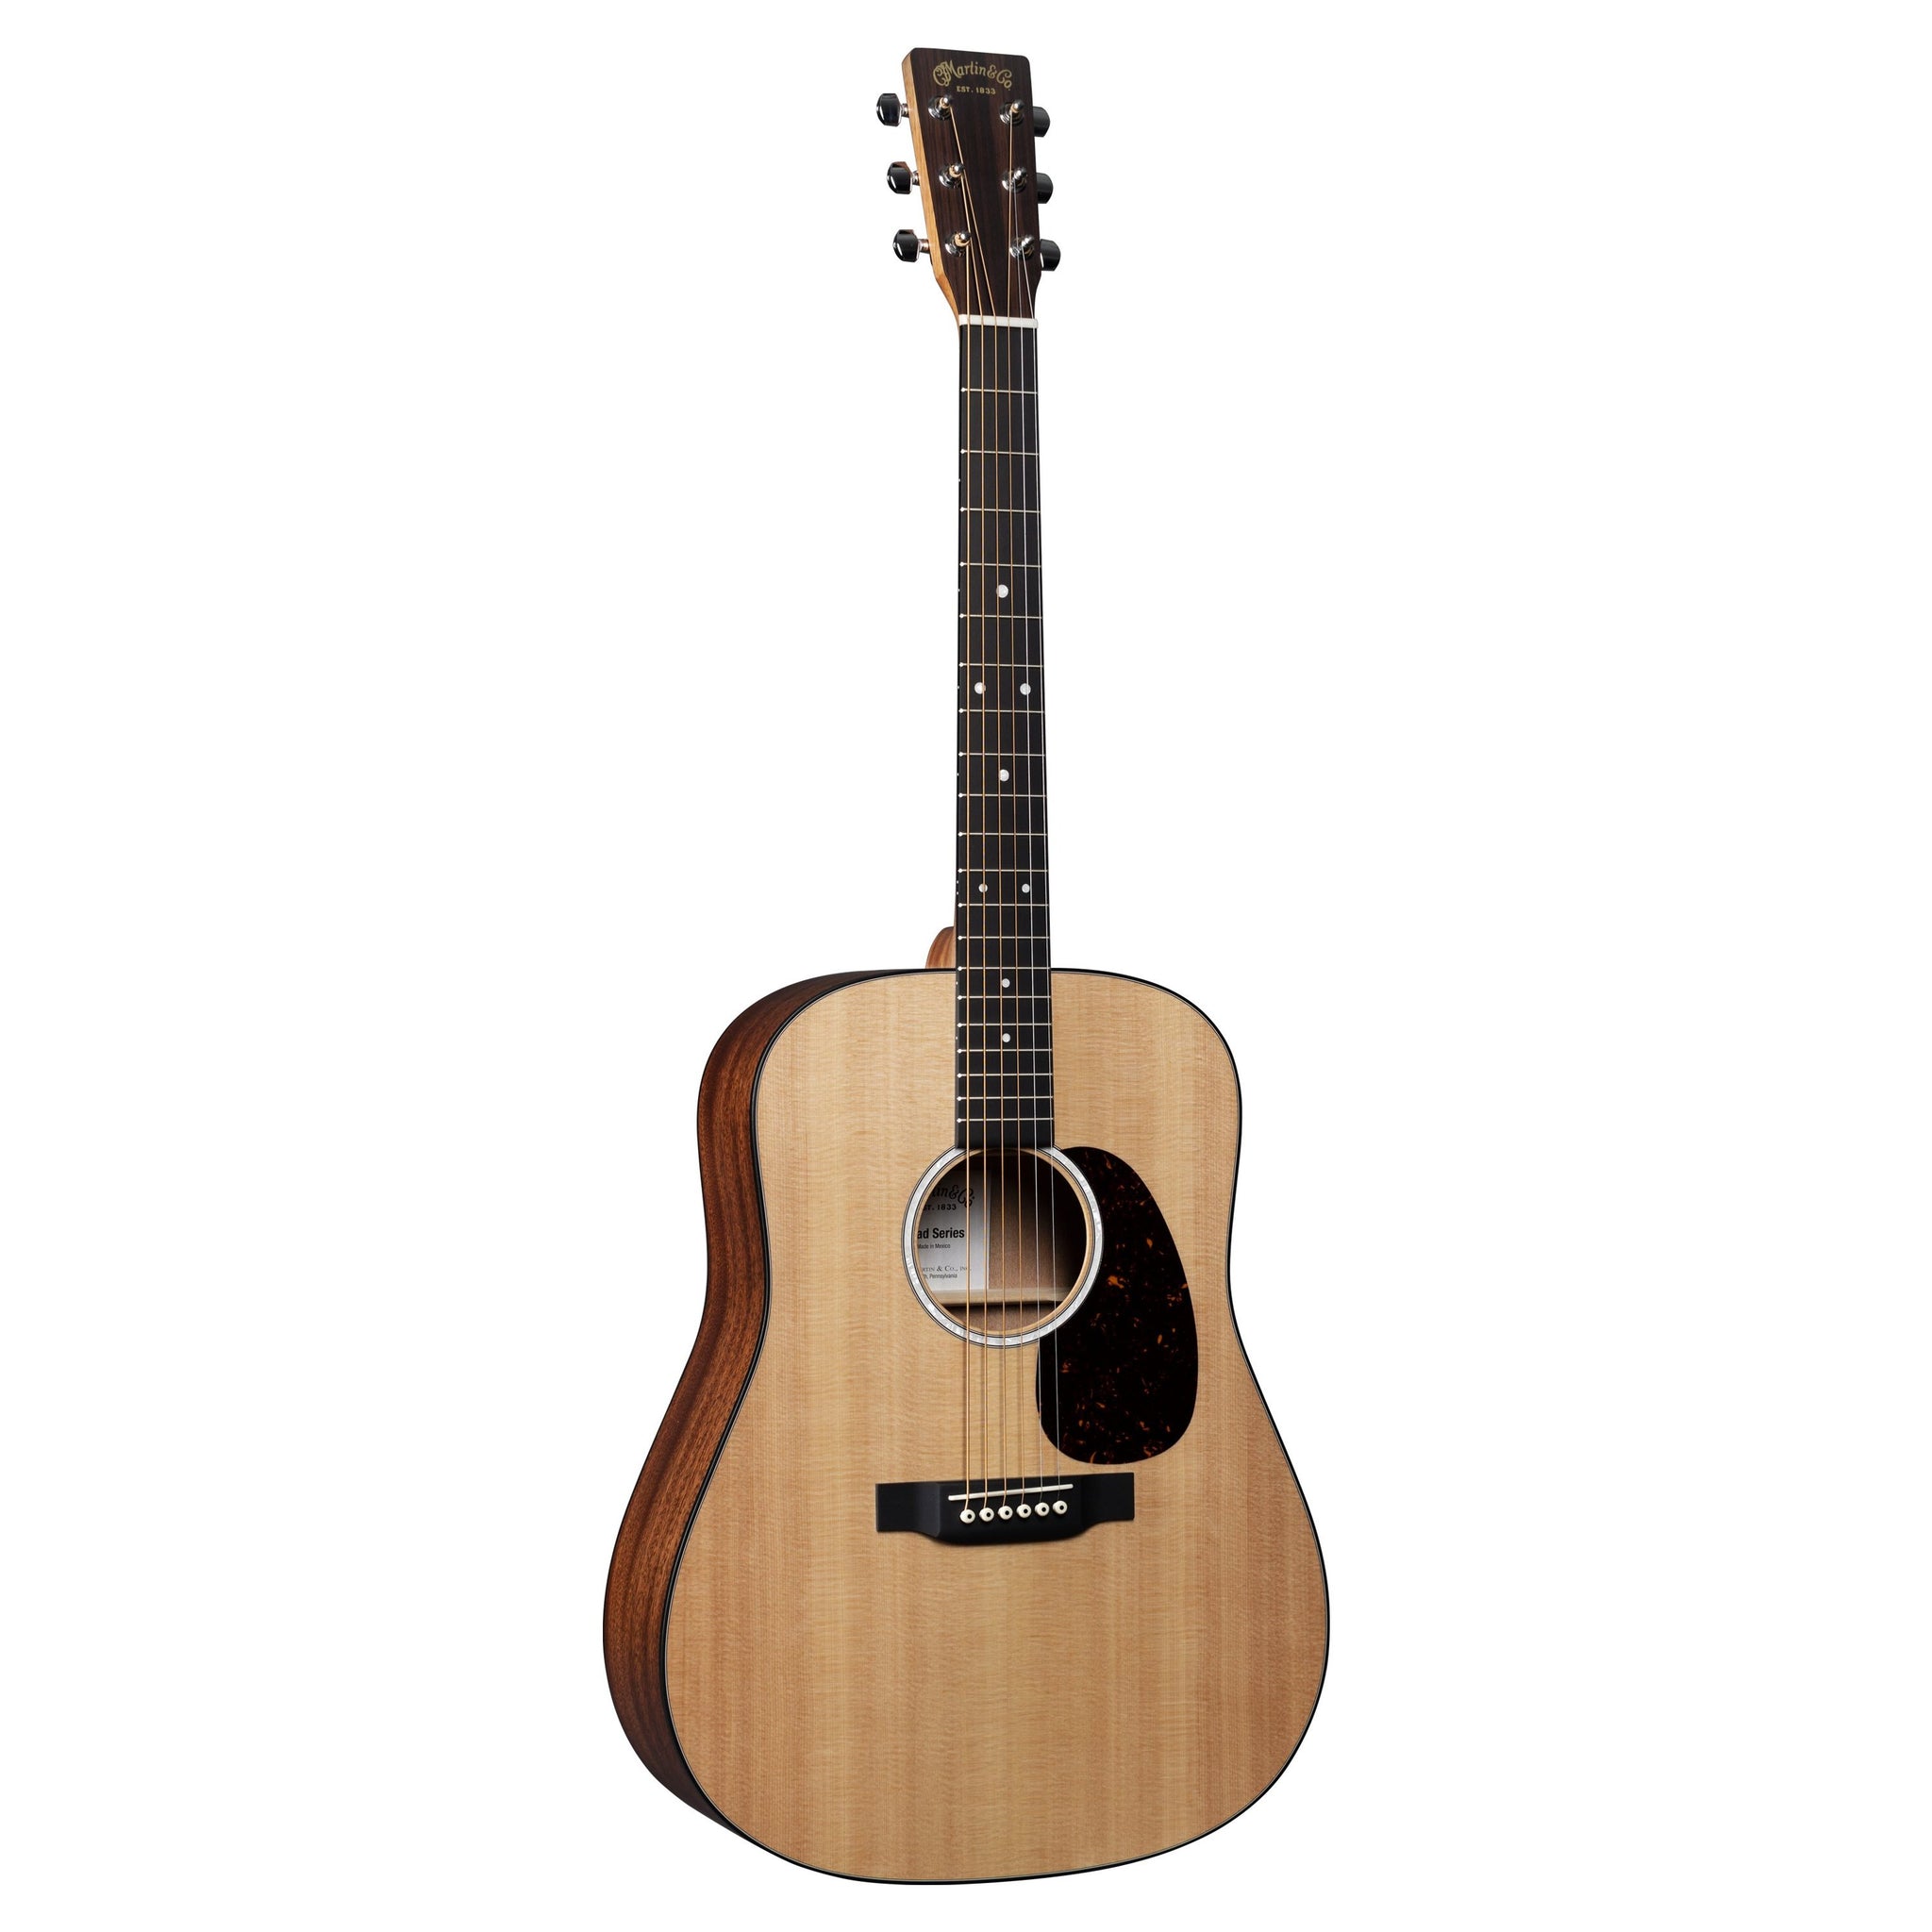 Martin D10E-02 Road Series Sitka Top Acoustic/Electric Guitar with Soft Case-Music World Academy